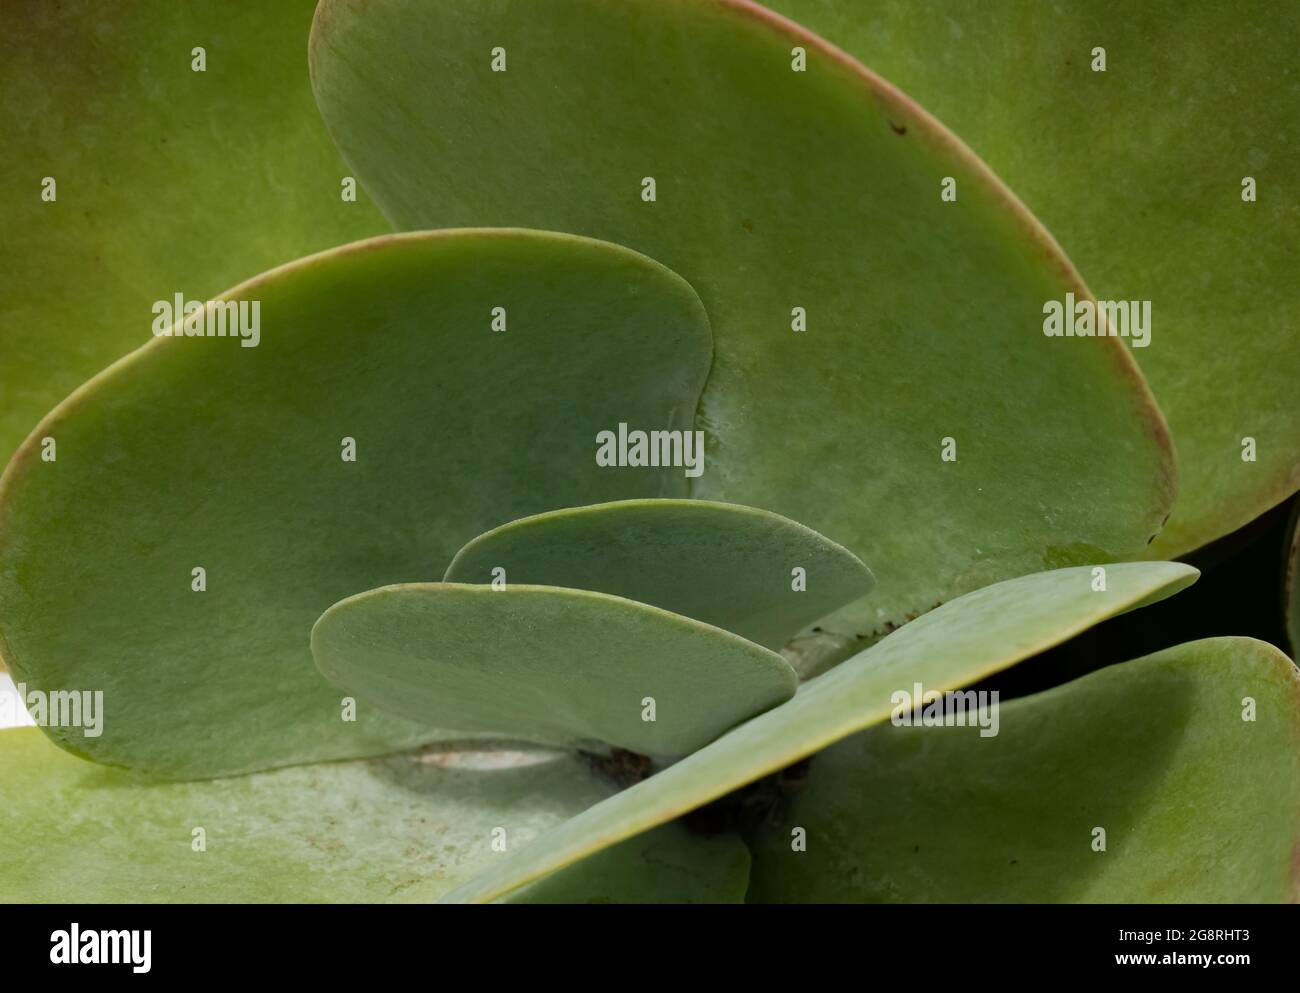 The center of a green kalanchoe thyrsiflora or paddle plant succulent with round, flat leaves. Blurred leaves surround the center forming a background Stock Photo